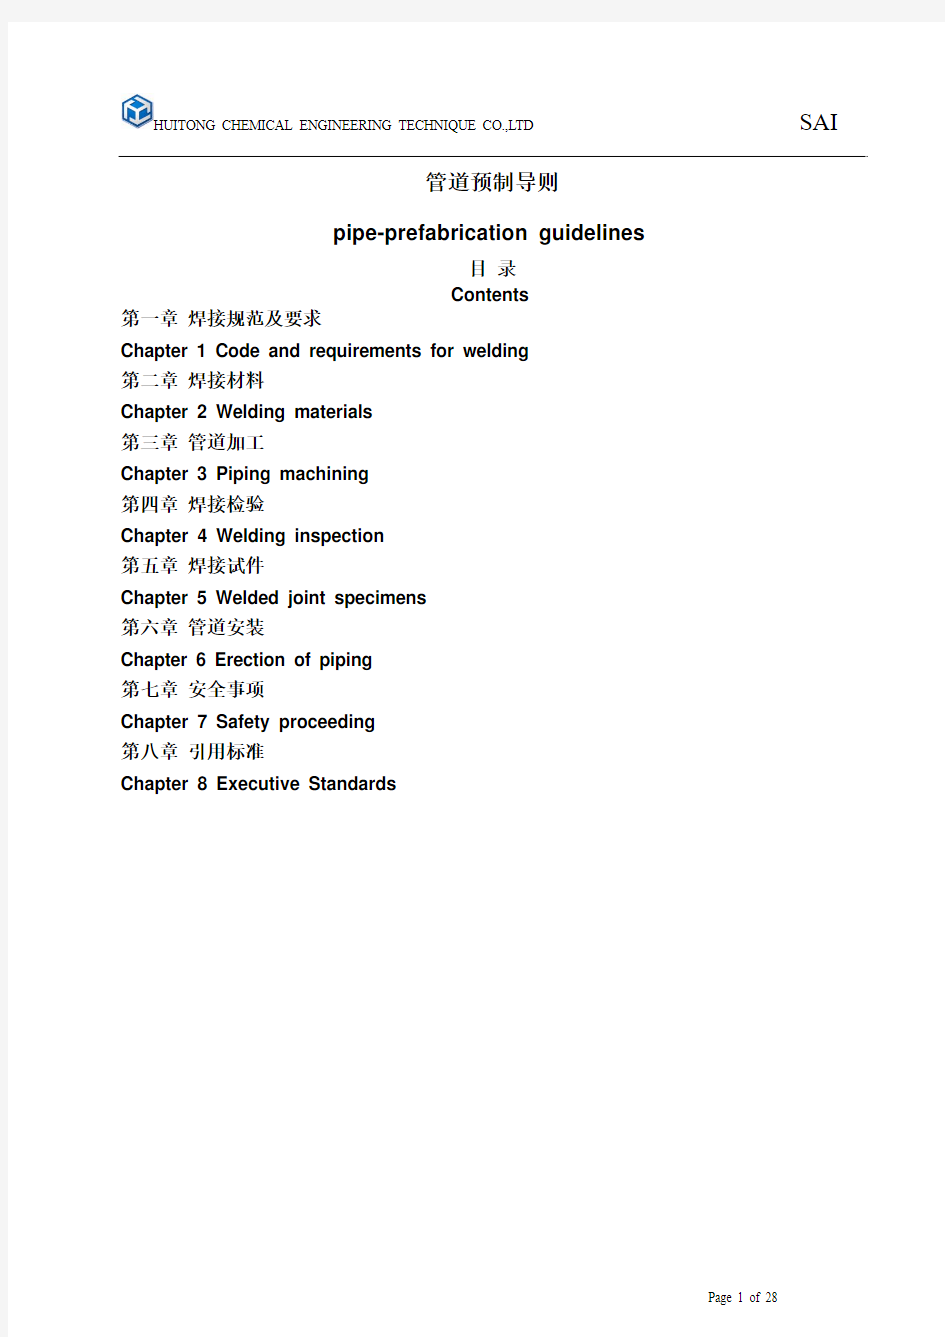 pipe-prefabrication guidelines